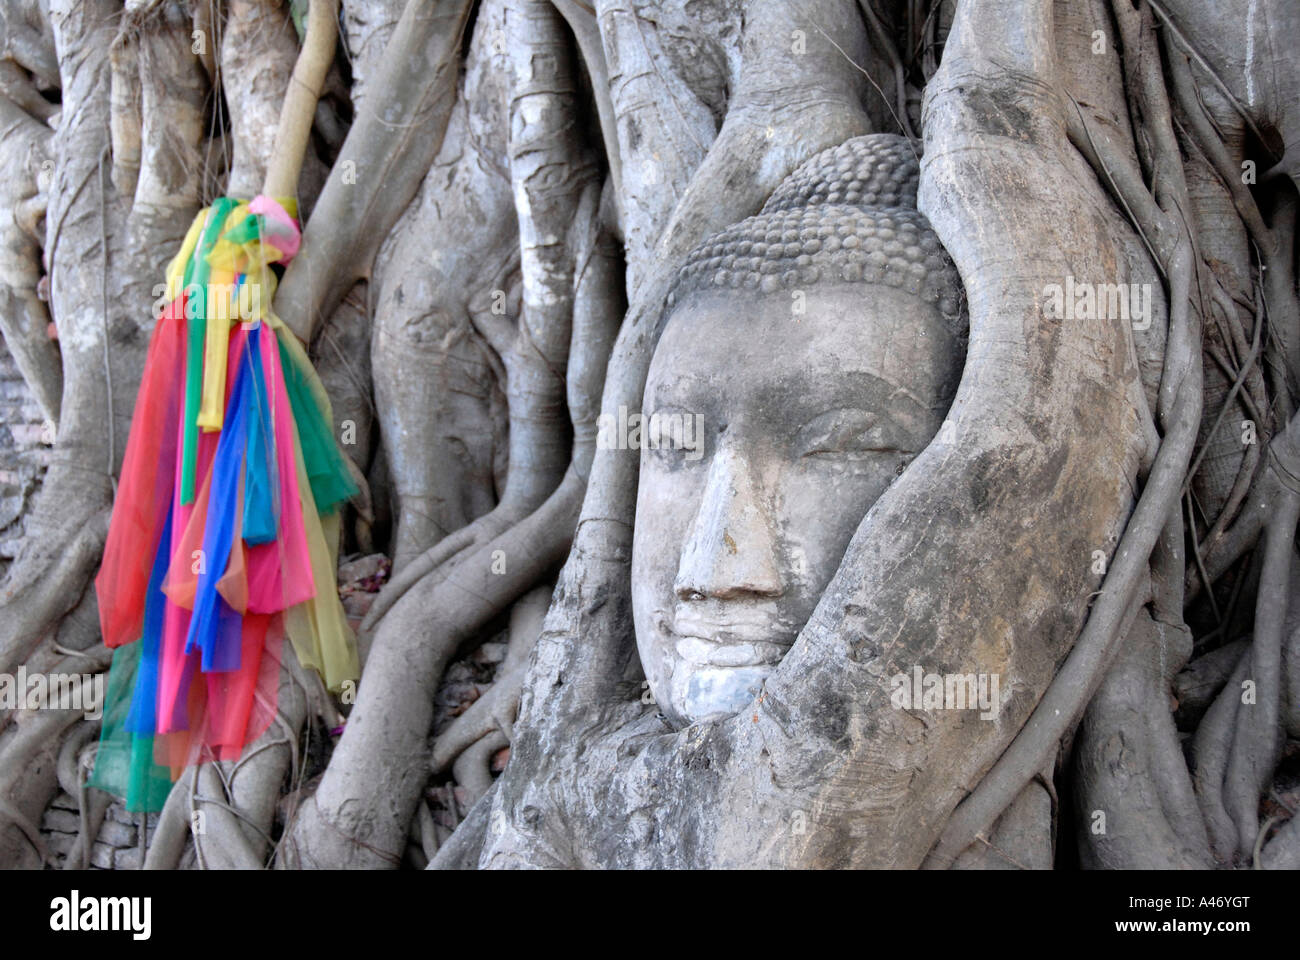 Ingrown head of a Buddha figure with colourful cloth into the root system of a fig tree Ficus religiosa Wat Mahathat Ayutthaya Stock Photo